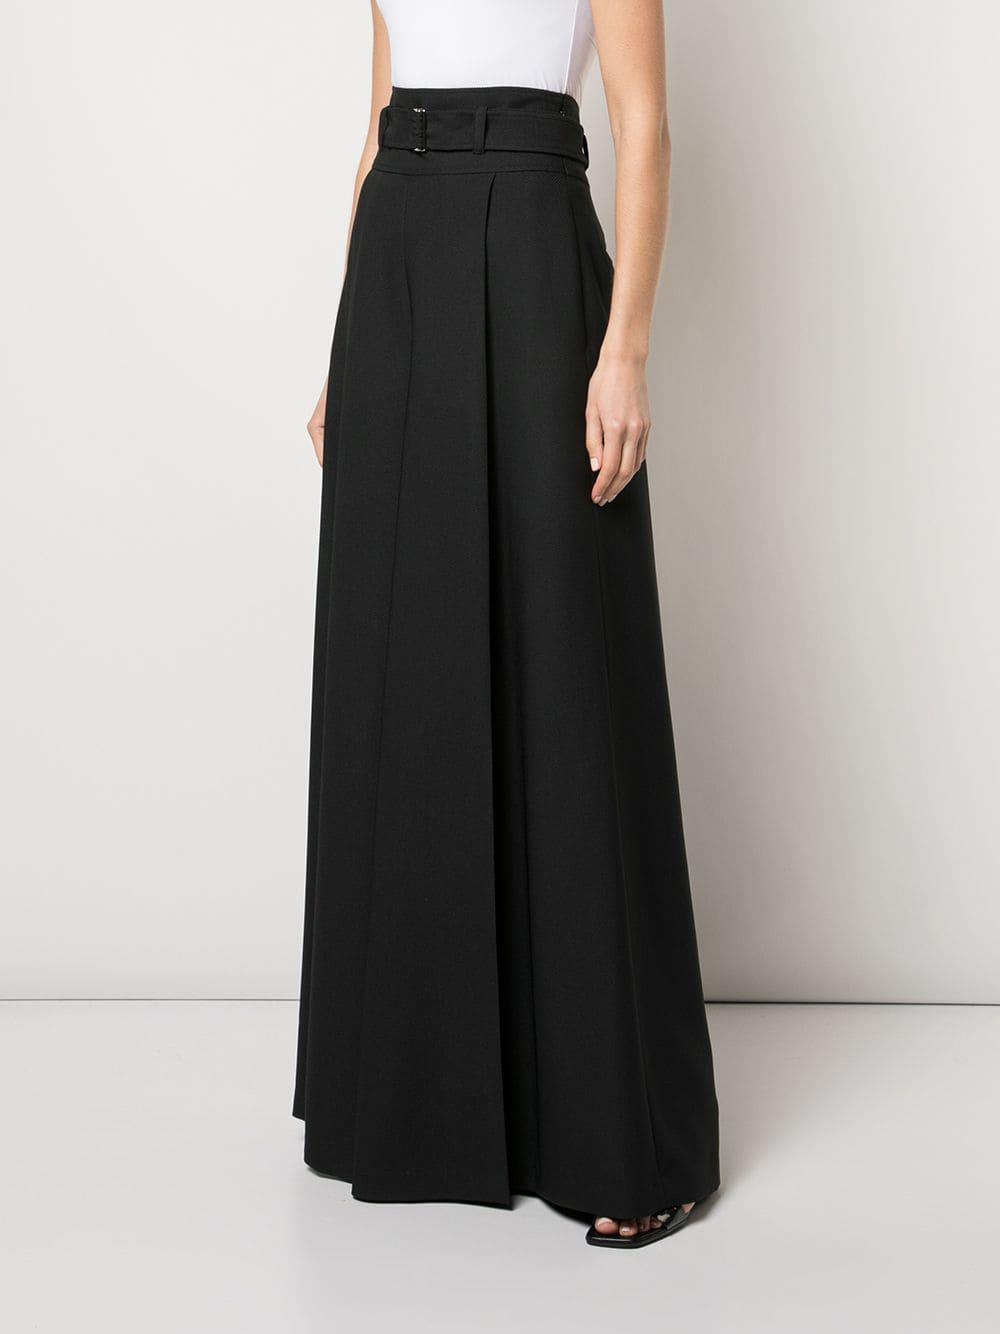 ADEAM Belted Extra Wide Leg Trousers in Black - Lyst